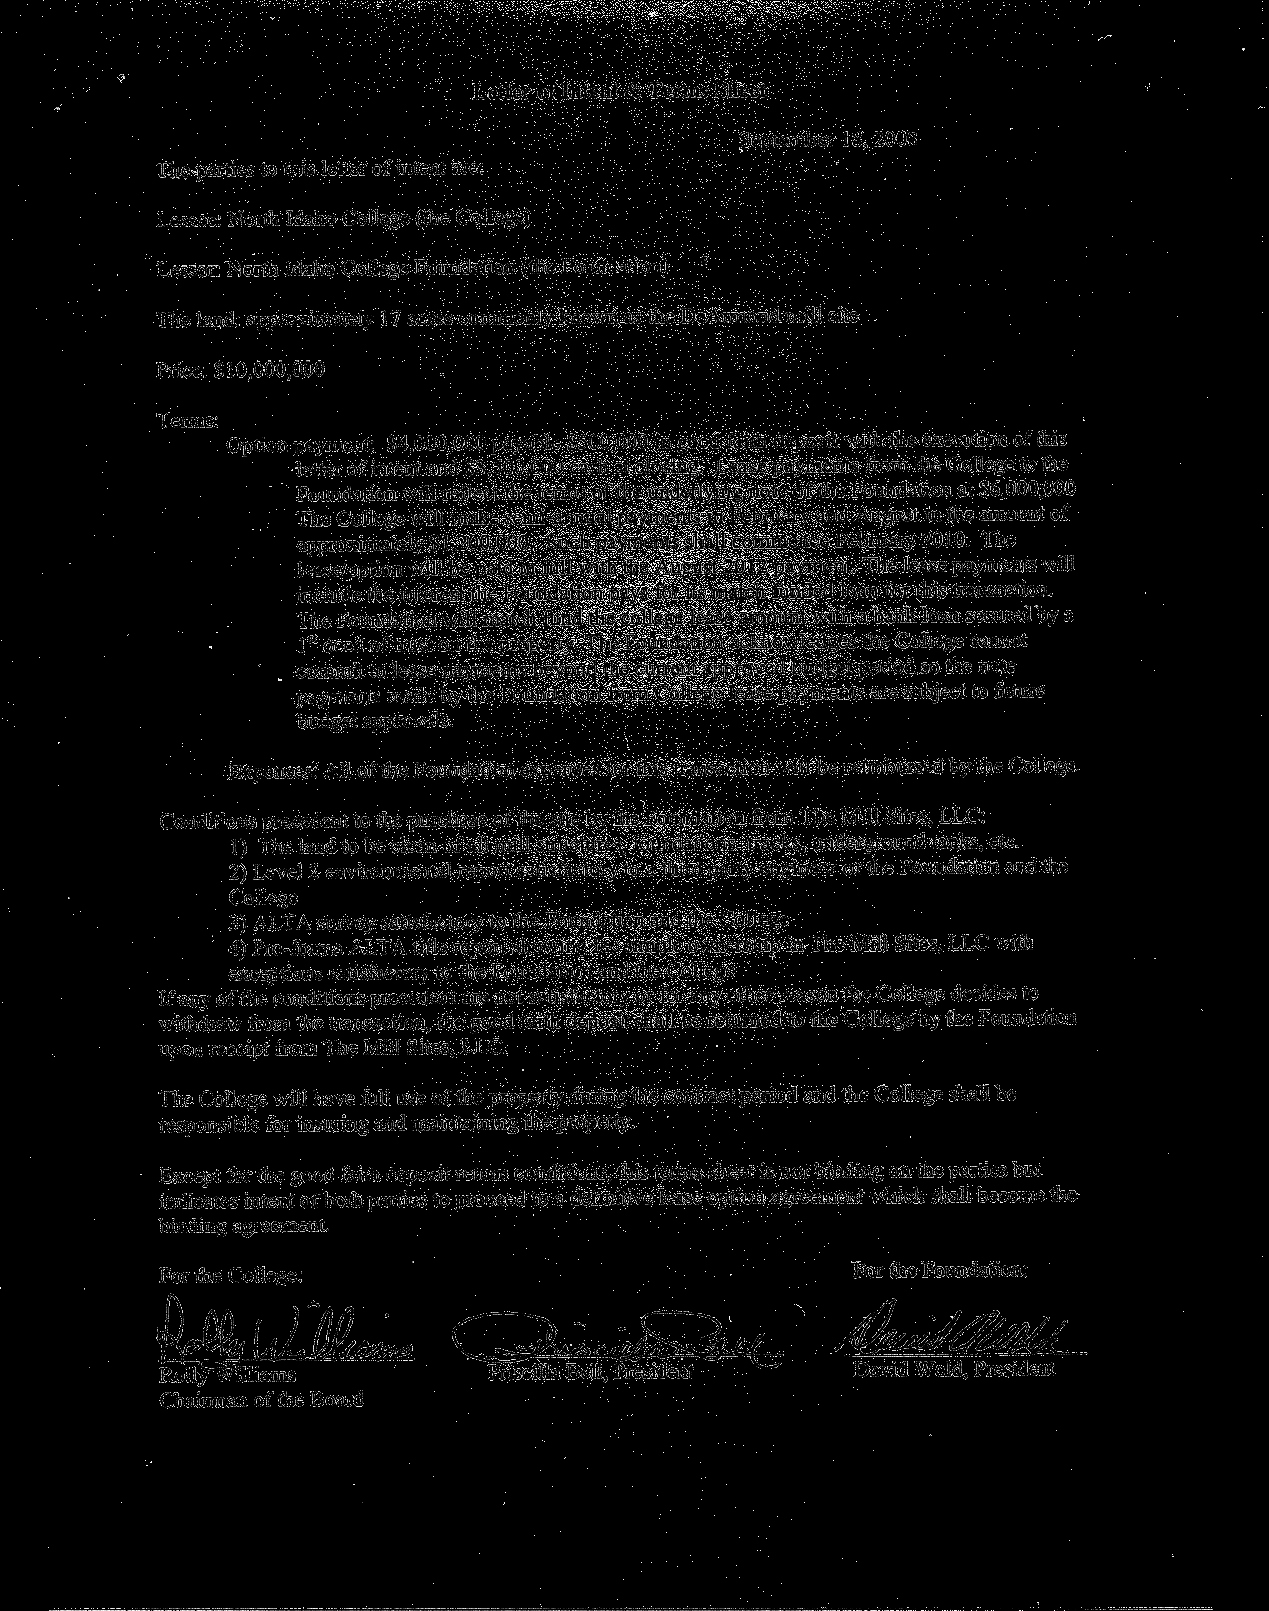 Lease Letter Of Intent Sample Awesome Lease Letter Samples Zoro Blaszczak